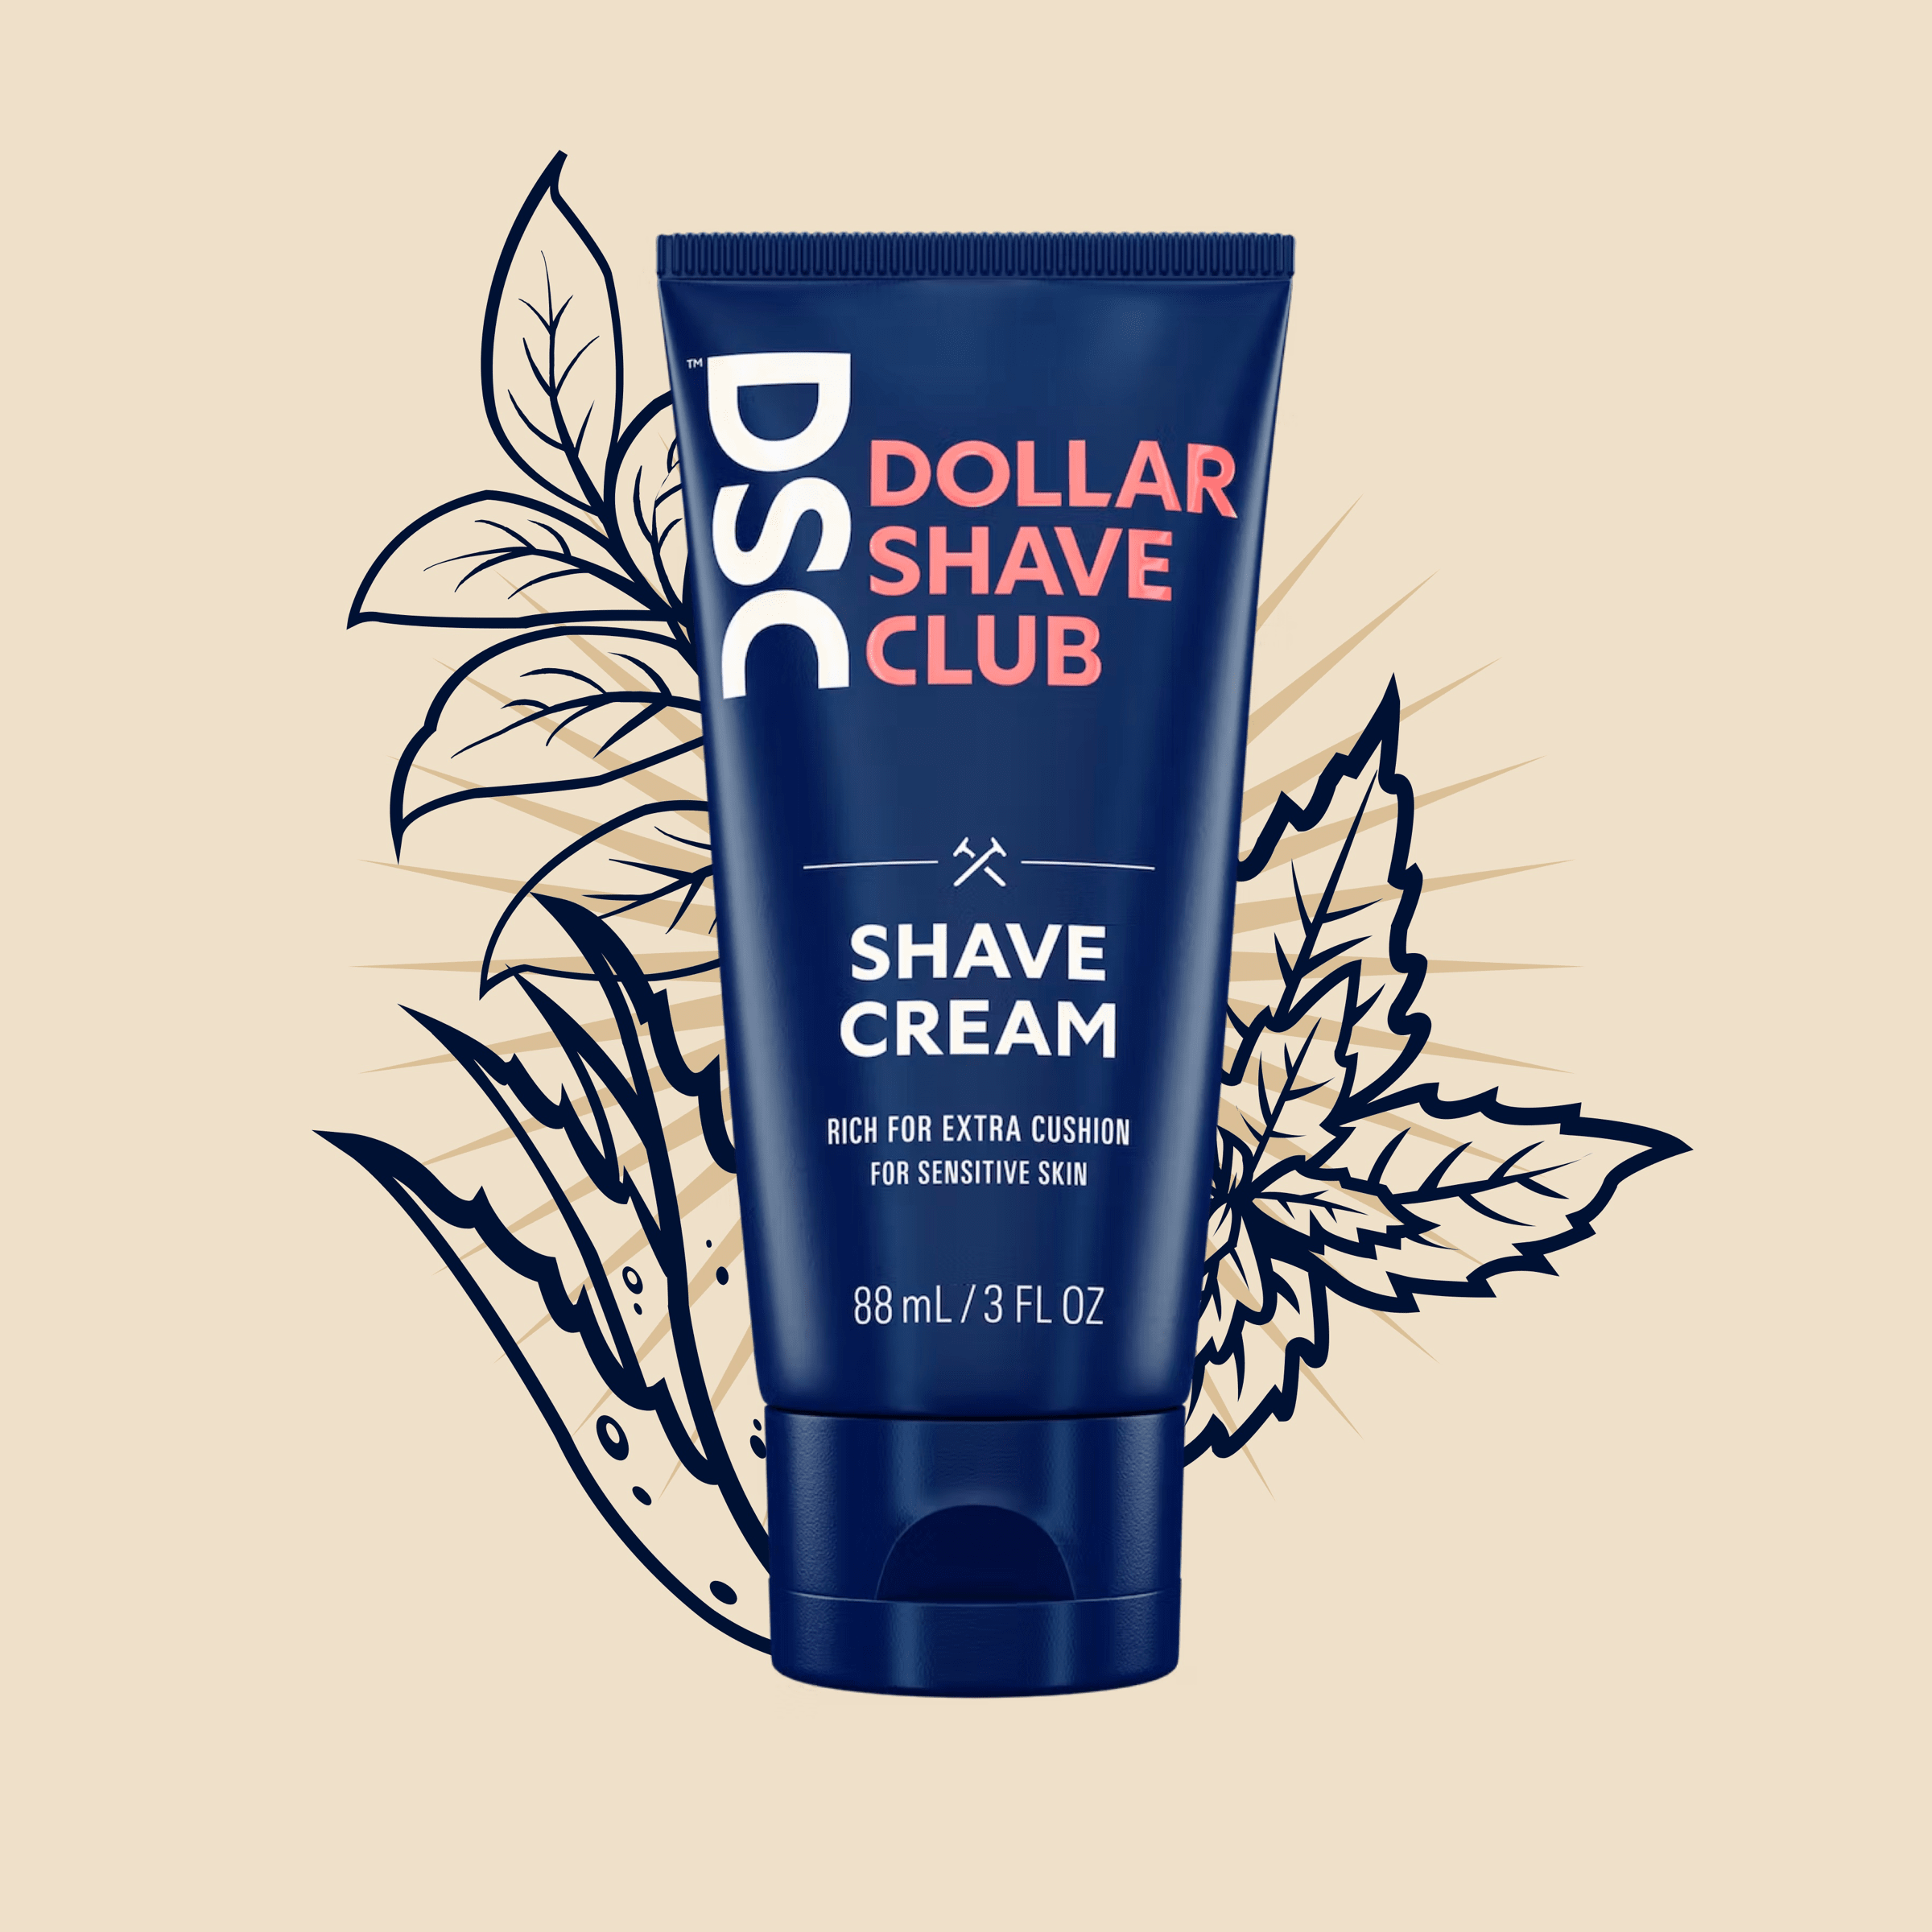 Dollar Shave Club Shave Cream product image with illustration.